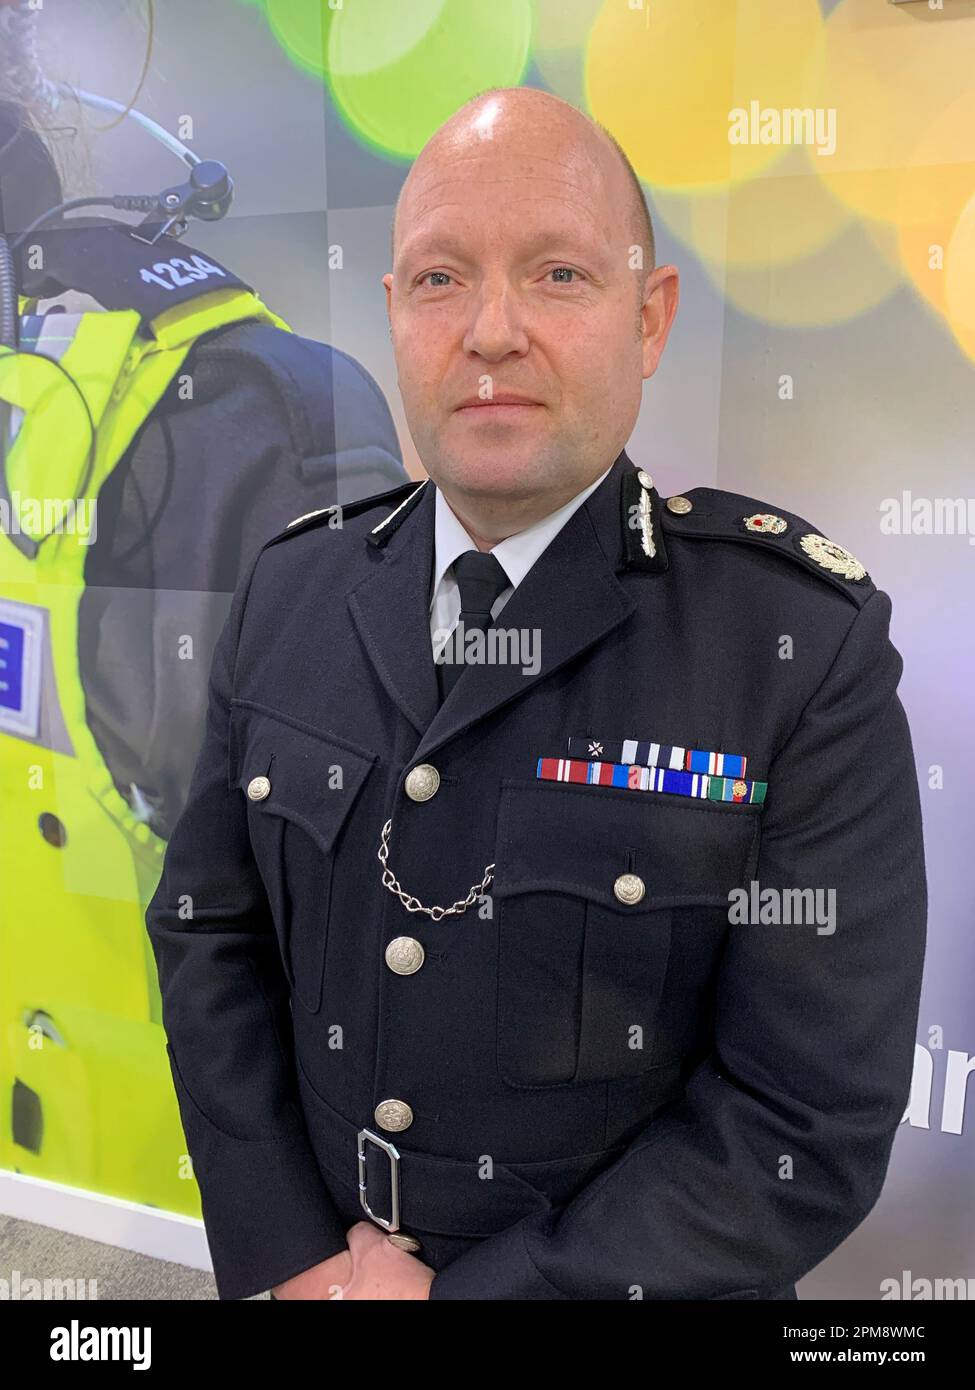 Chief Constable Craig Guildford Of West Midlands Police At The Police